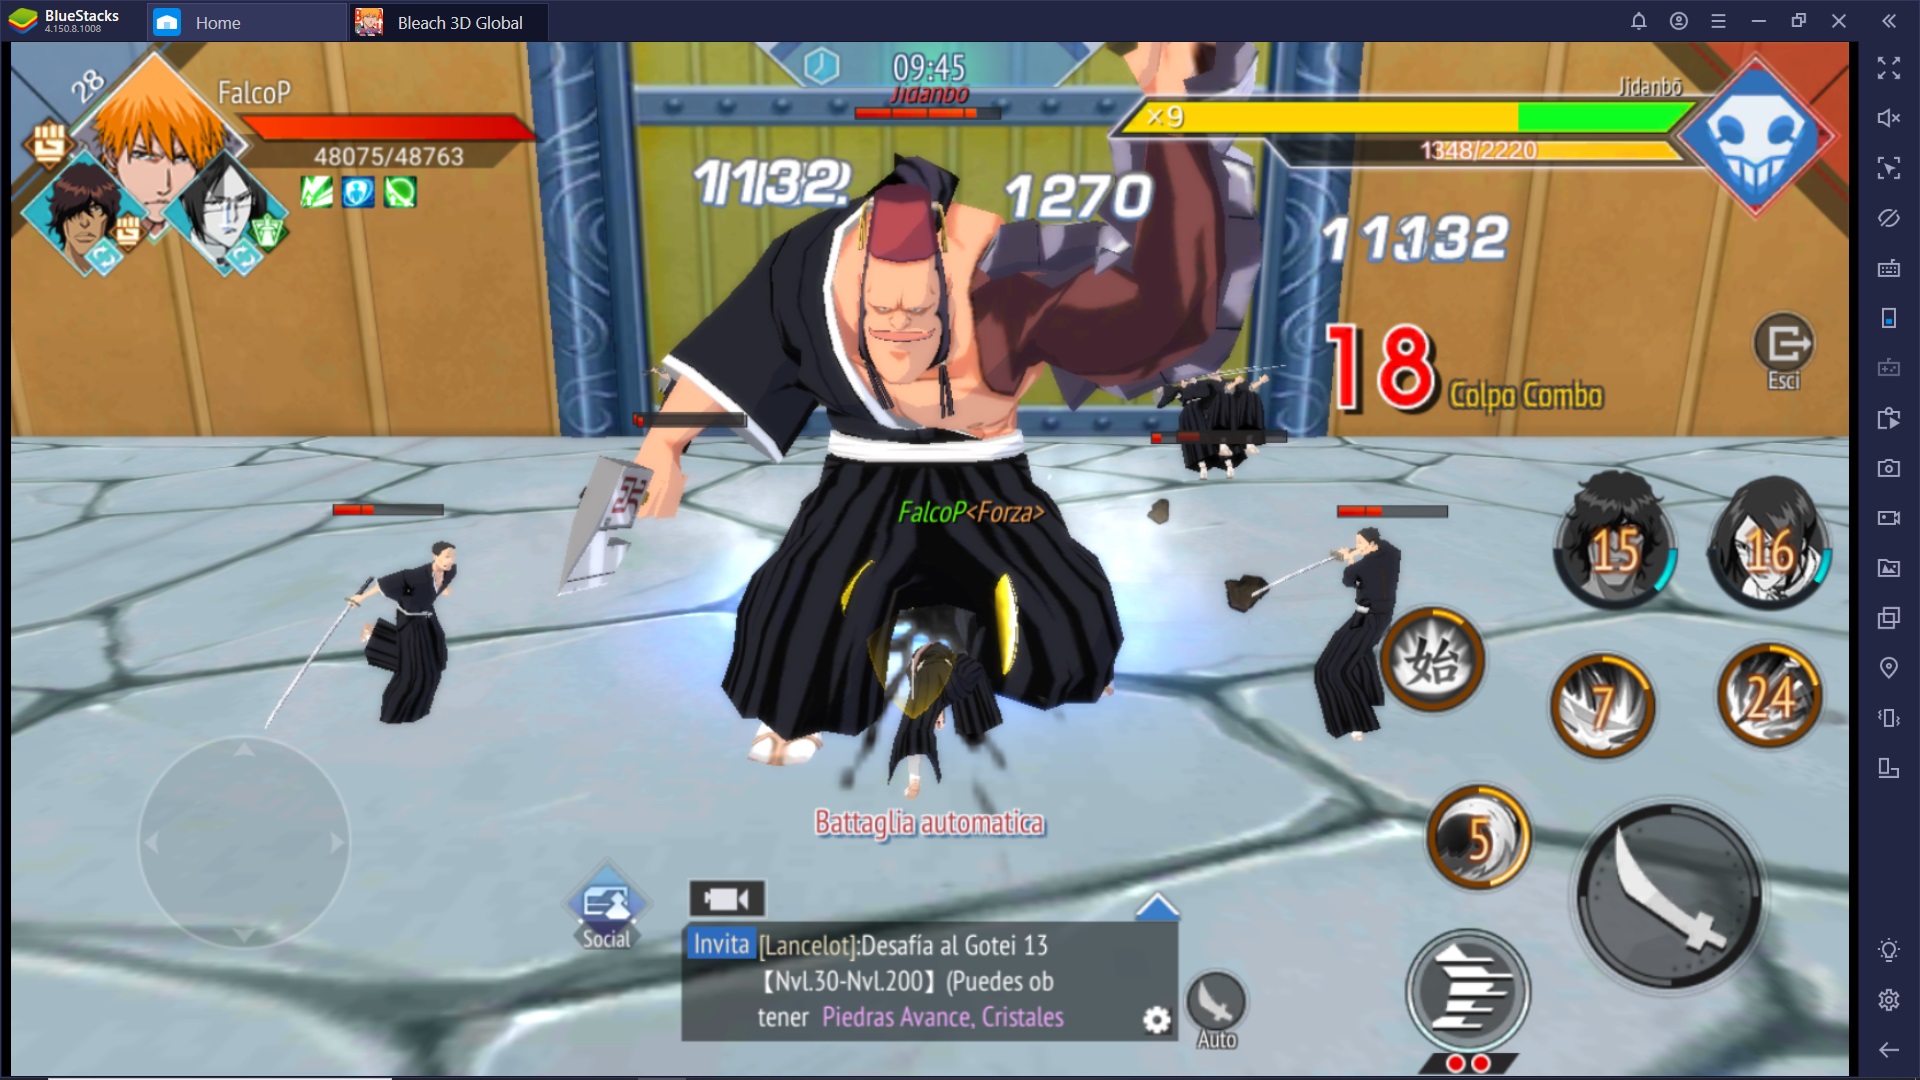 Come Combattere in BLEACH Mobile 3D